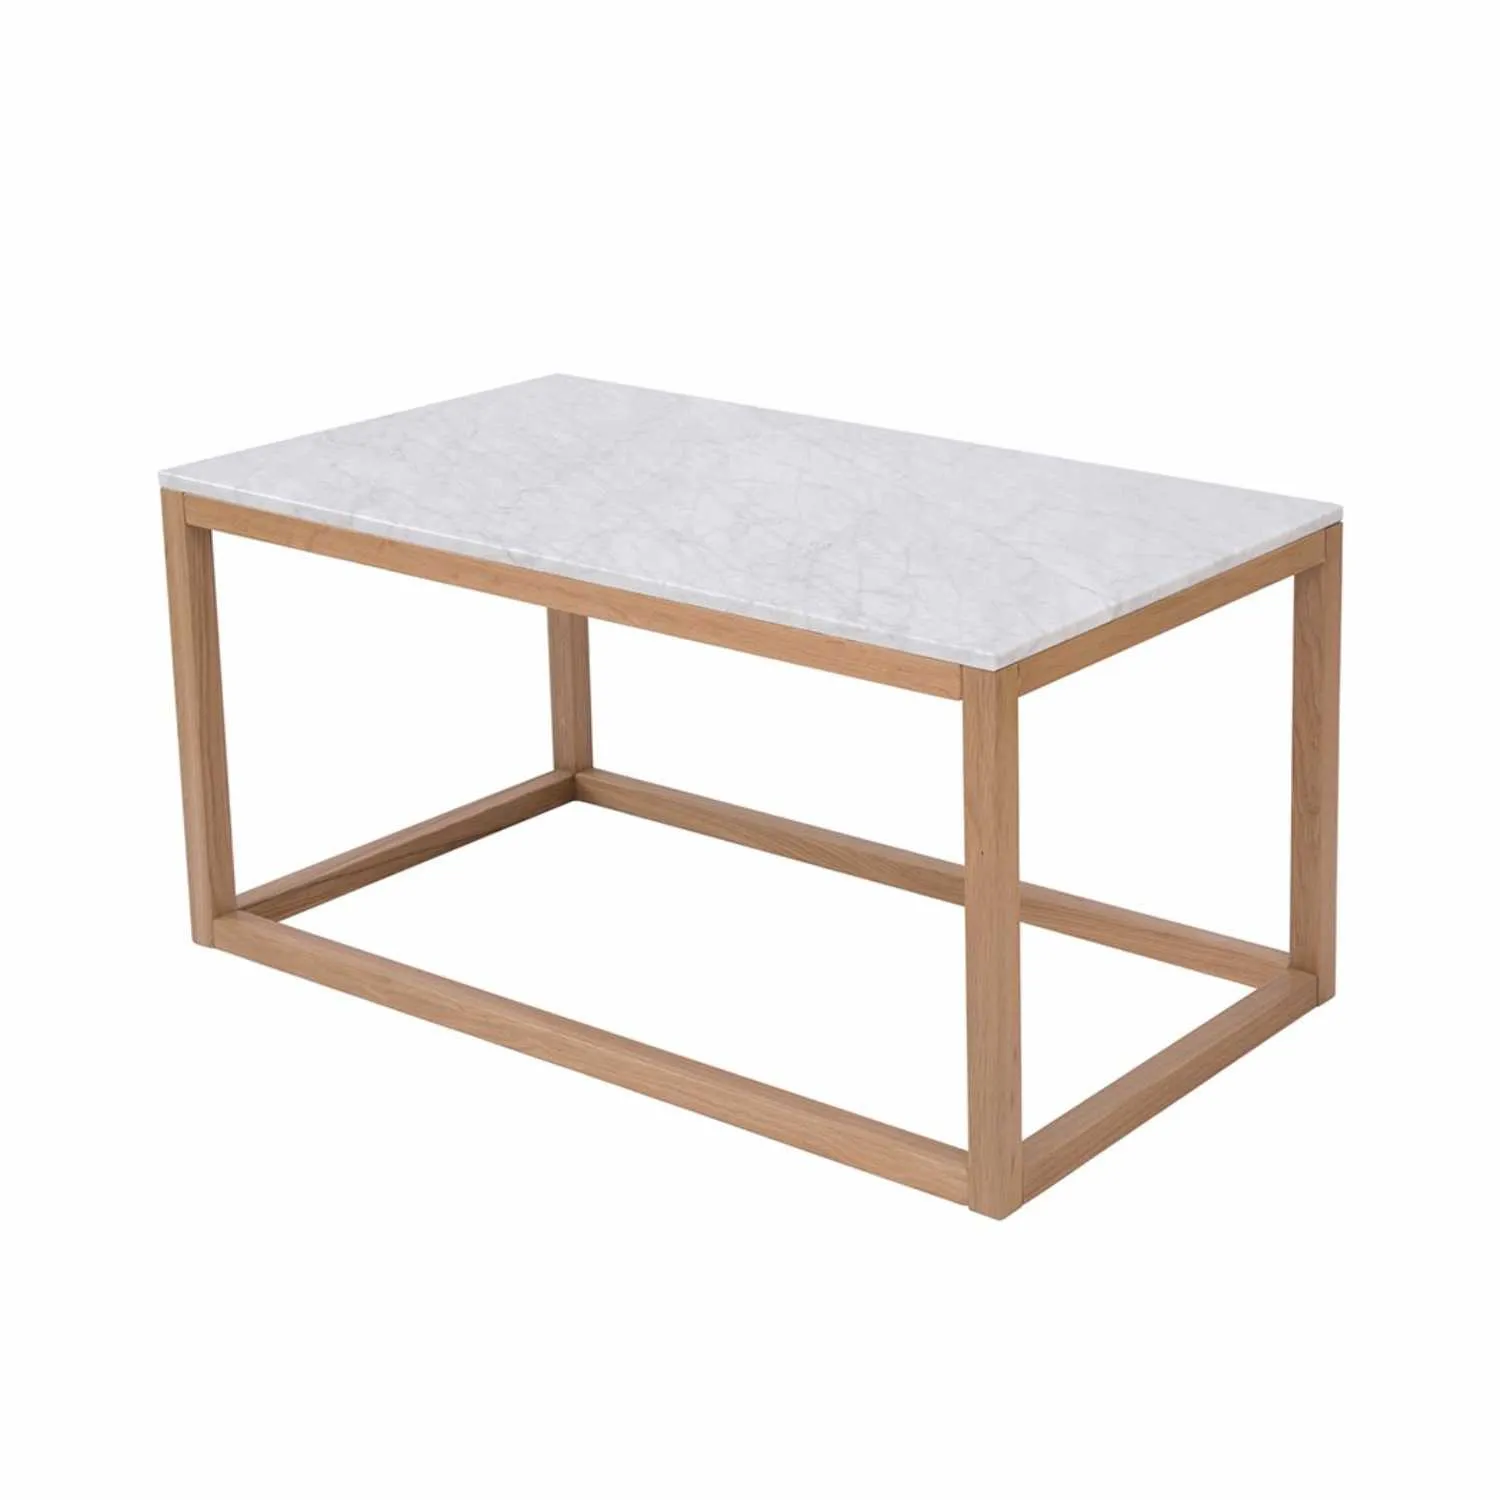 Harlow Coffee Table Oak white Marble Top